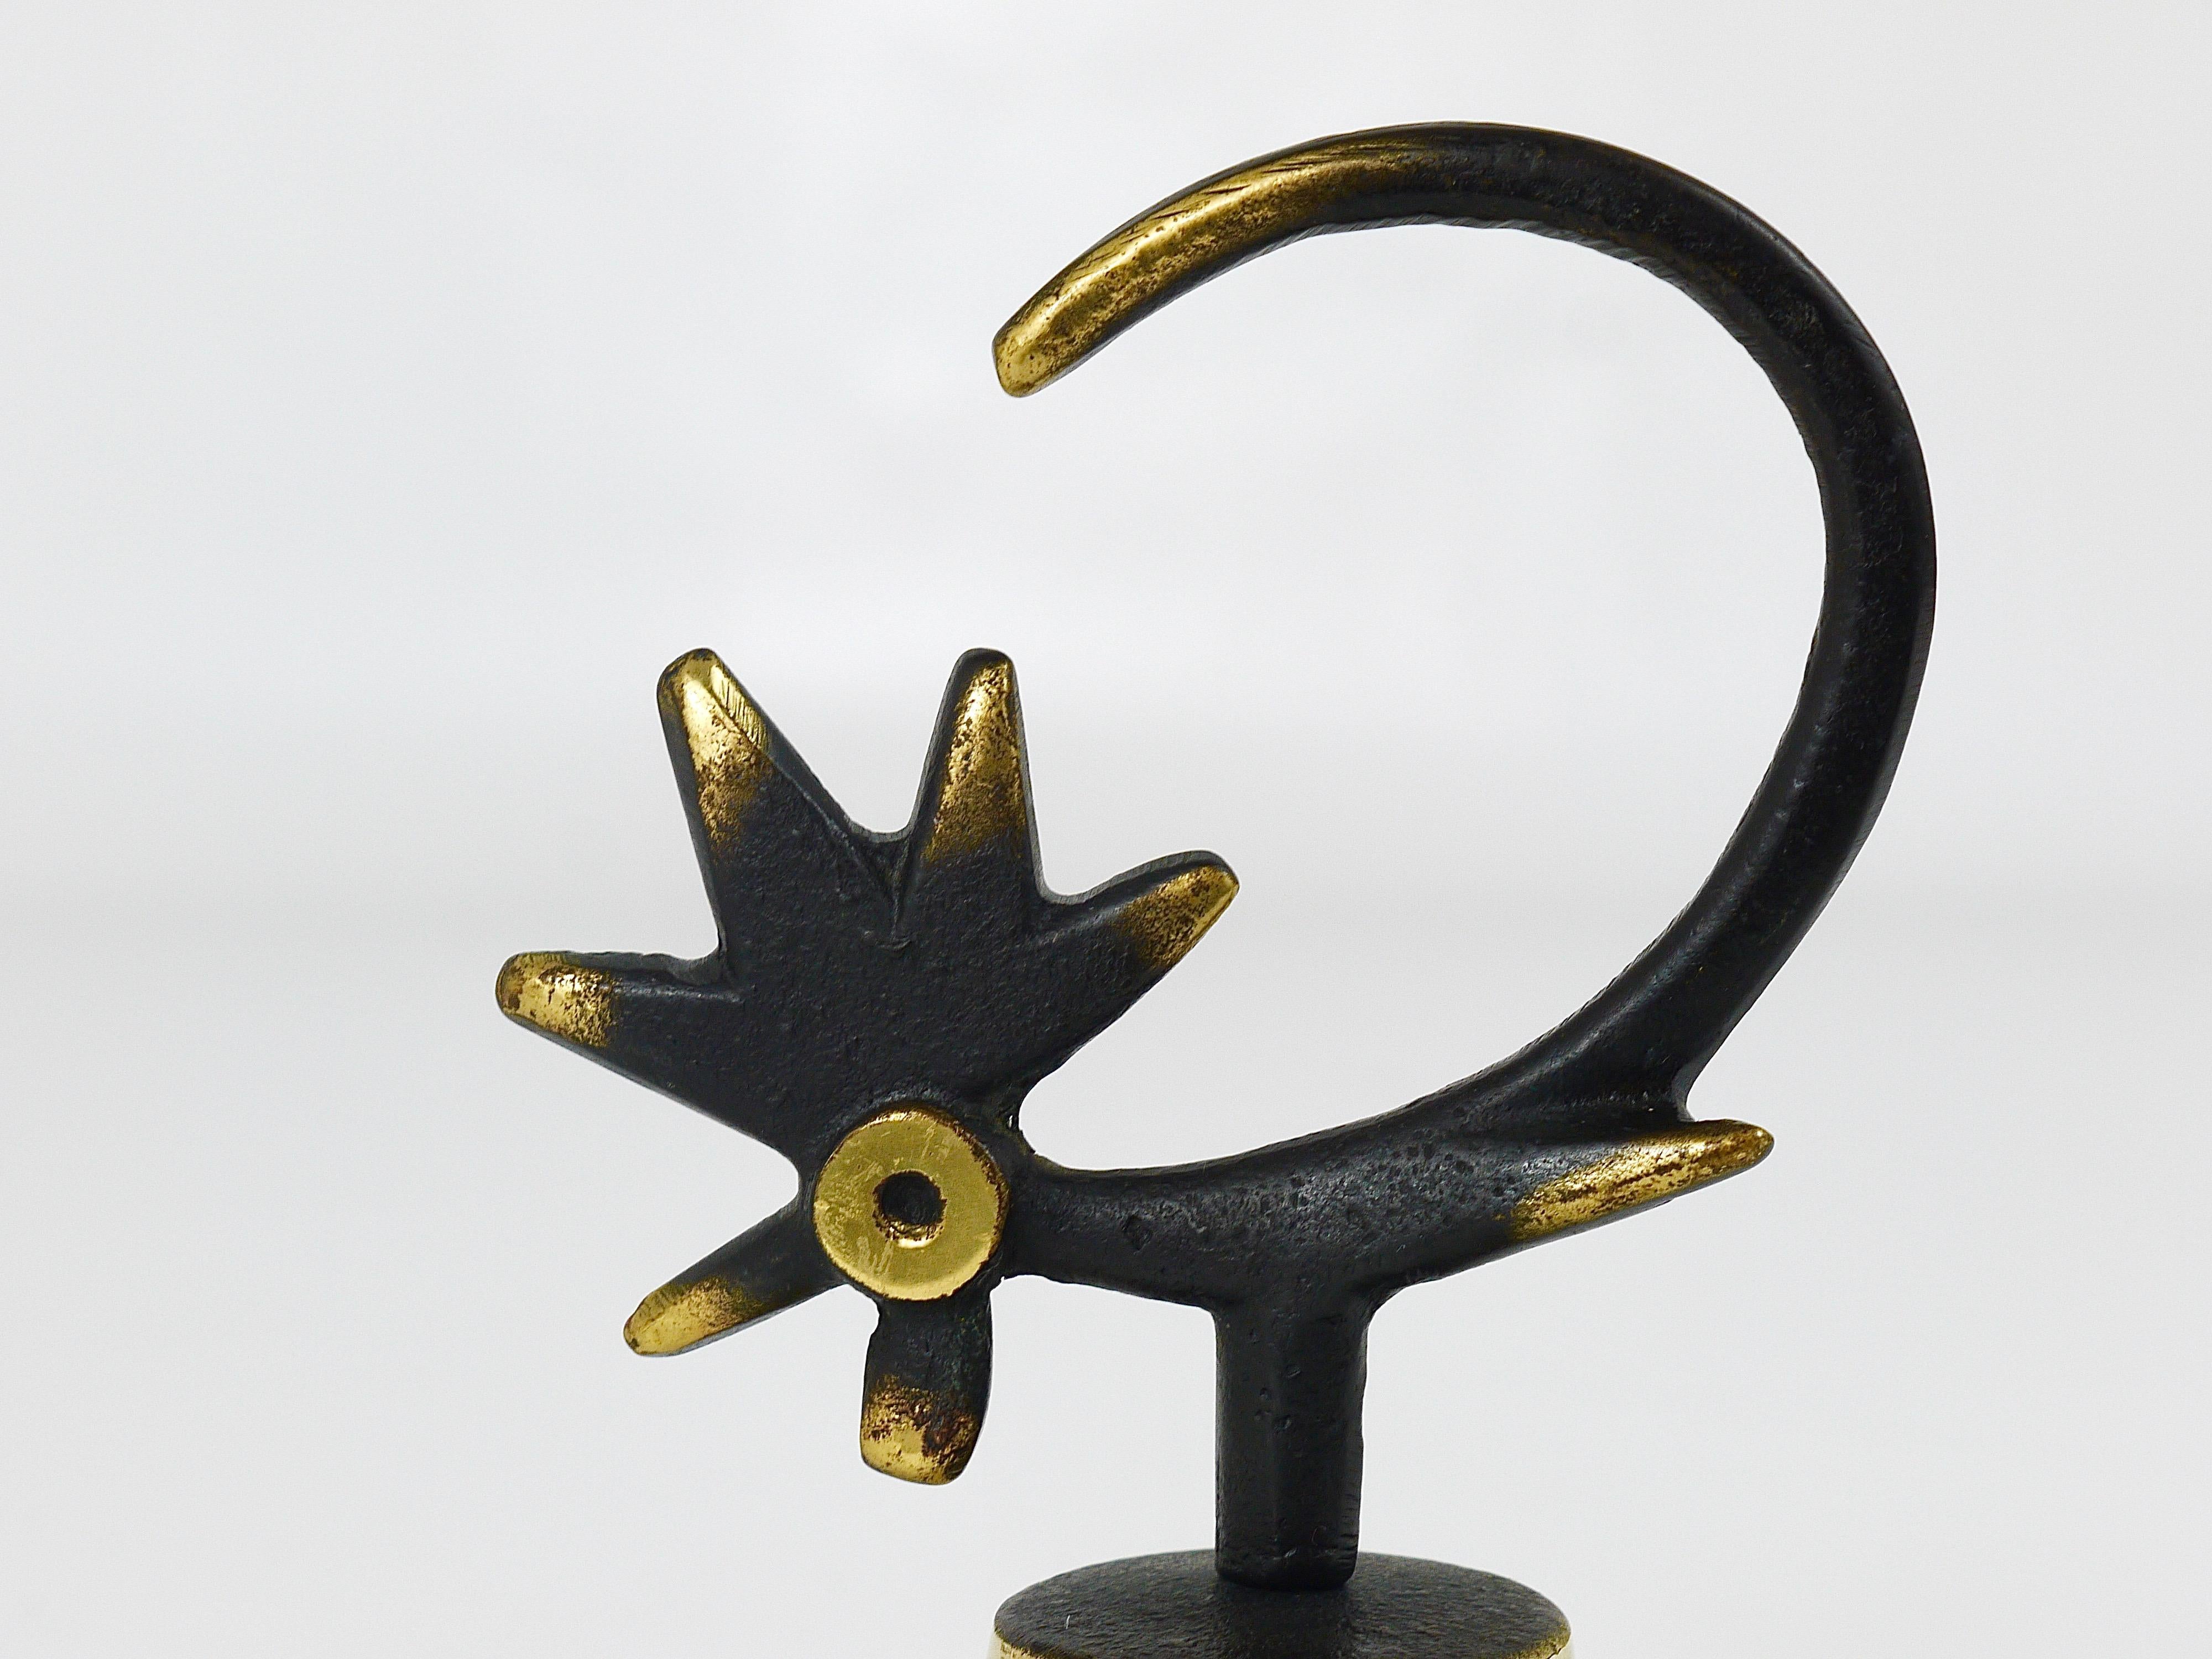 A charming midcentury table bell displaying a cock. A very humorous design by Walter Bosse, executed by Herta Baller Austria in the 1950s. Made of brass, in very good condition.